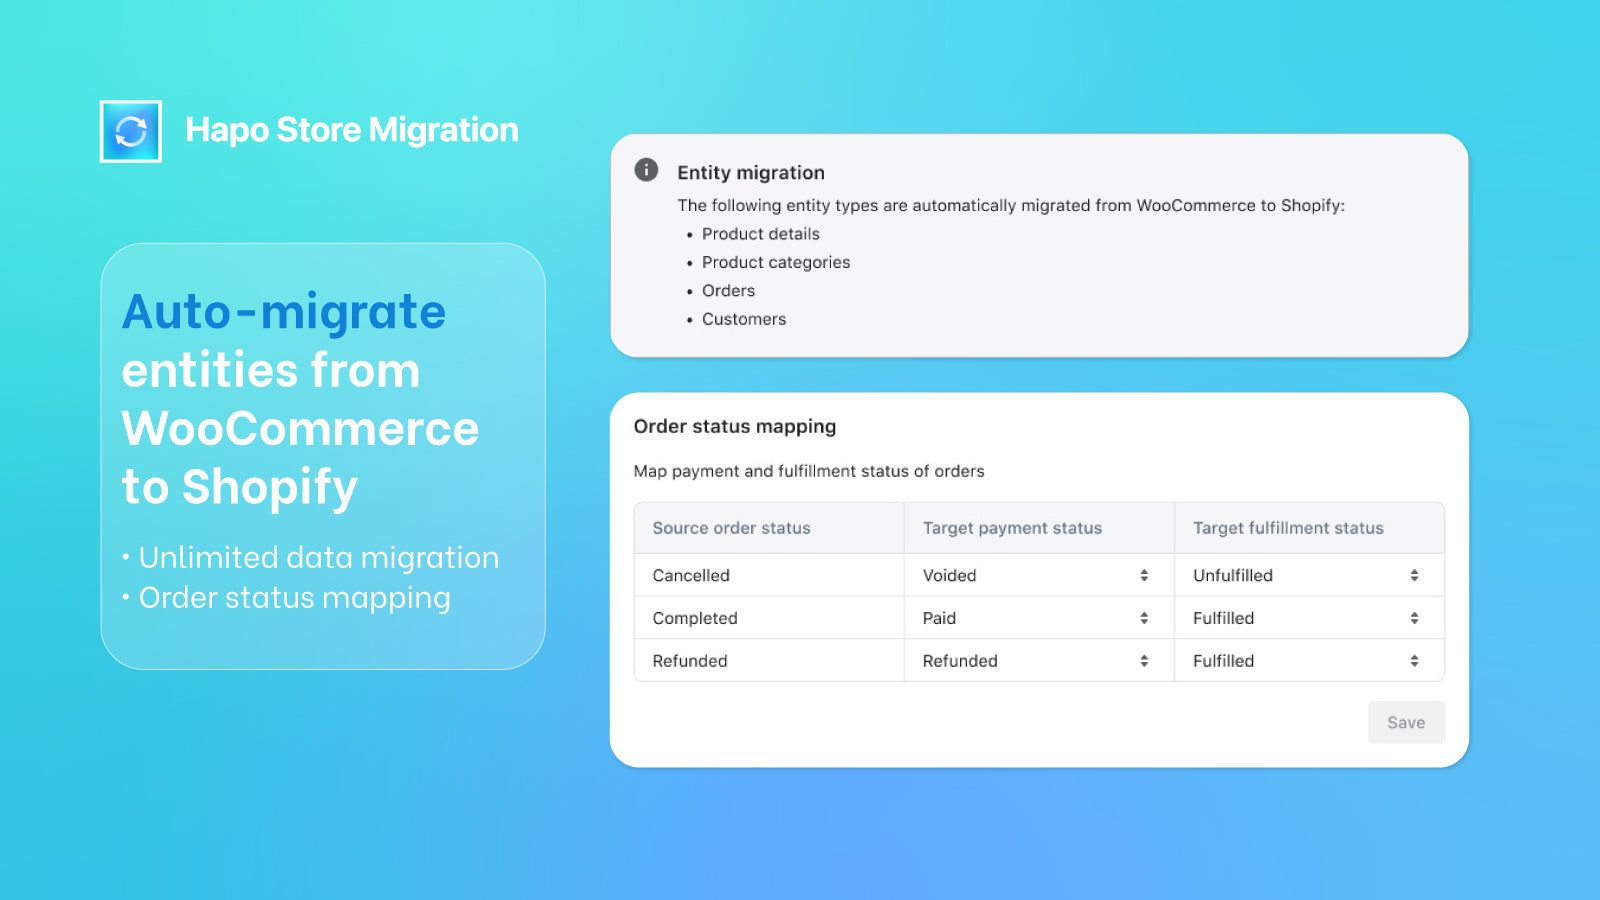 Auto-migrate entities from WooCommerce to Shopify